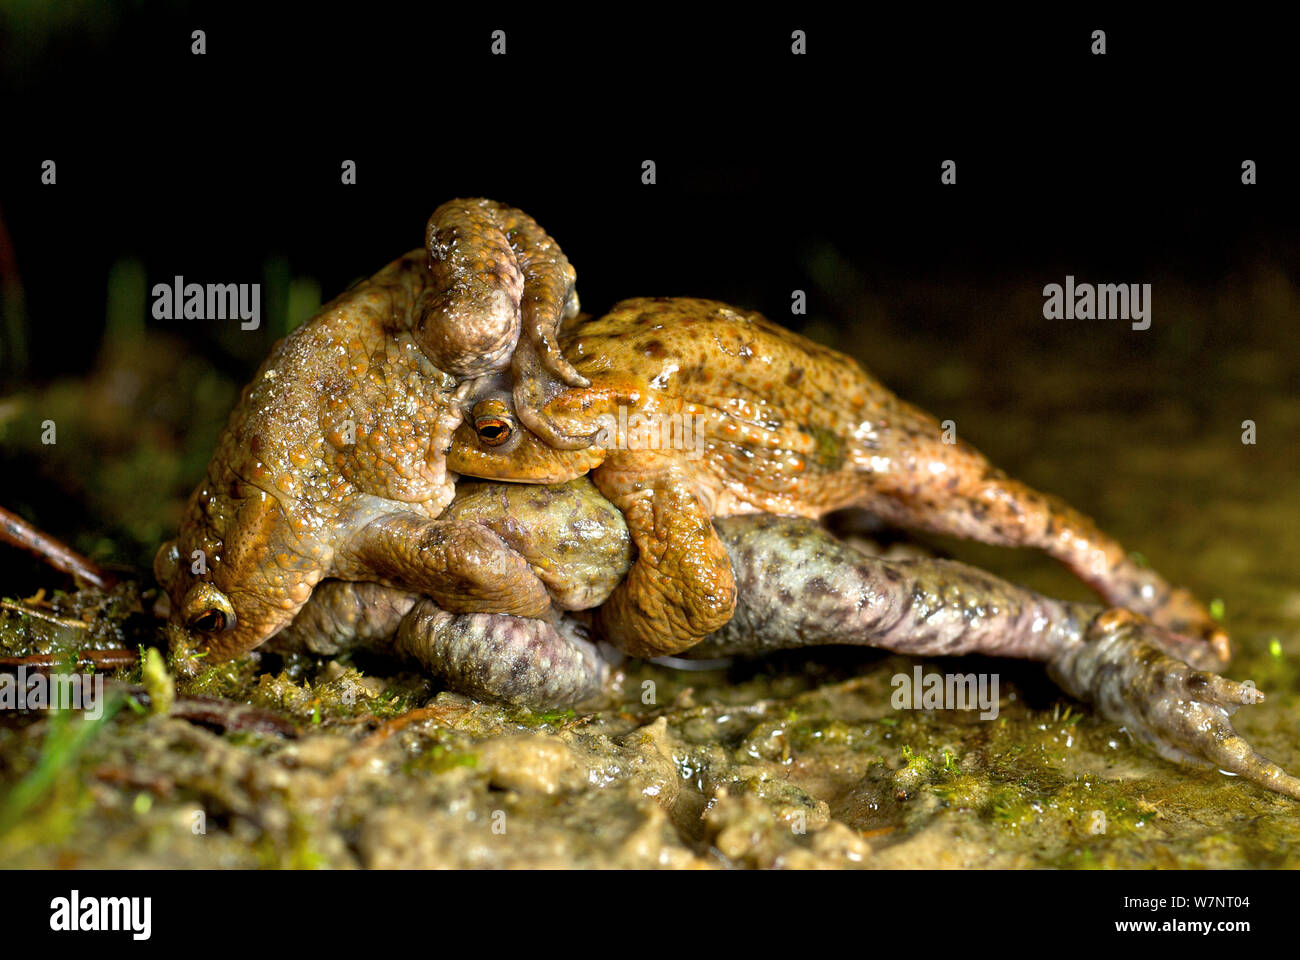 Two male Common european toads (Bufo bufo) competing to mate with the same female, Belgium, March. Stock Photo